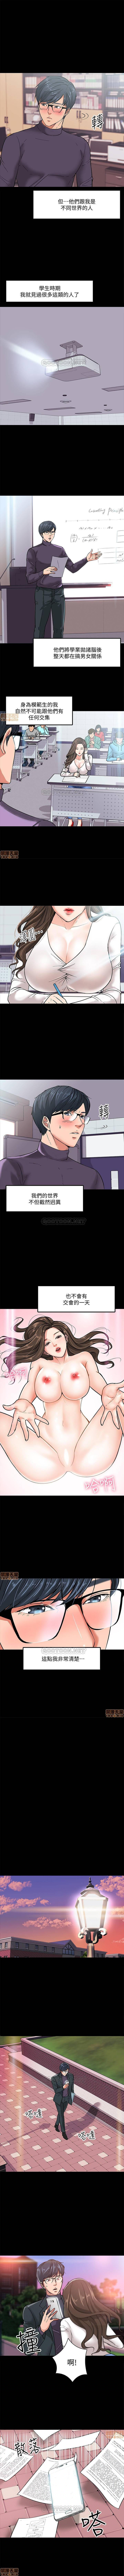 Double Blowjob PROFESSOR, ARE YOU JUST GOING TO LOOK AT ME? | DESIRE SWAMP | 教授，你還等什麼? Ch. 2 [Chinese] Manhwa Eating Pussy - Page 6